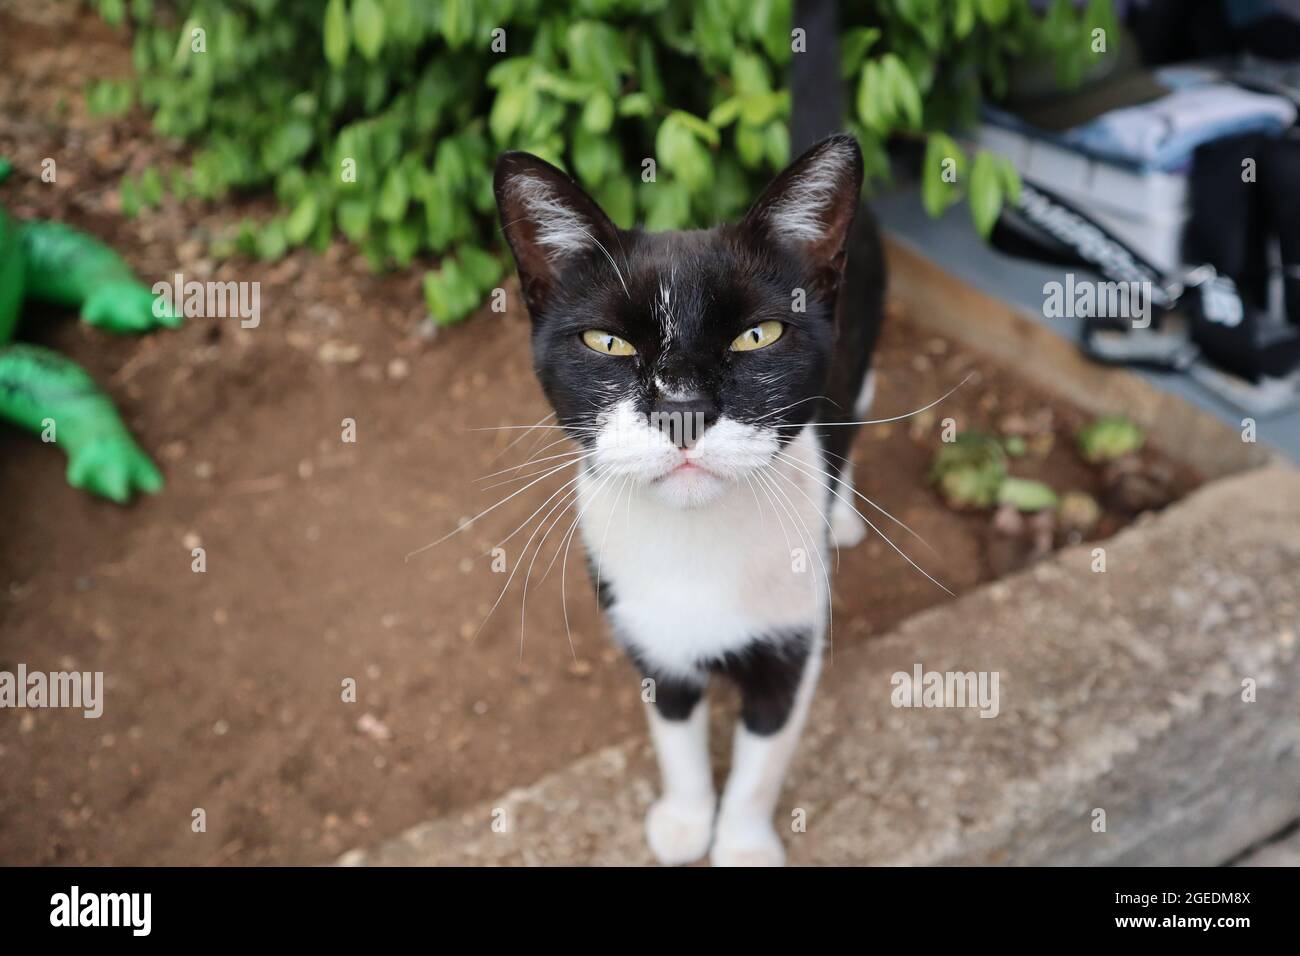 Portrait of a black/white cat with green eyes, staring into the camera. Natural background brown and green colors. Stock Photo